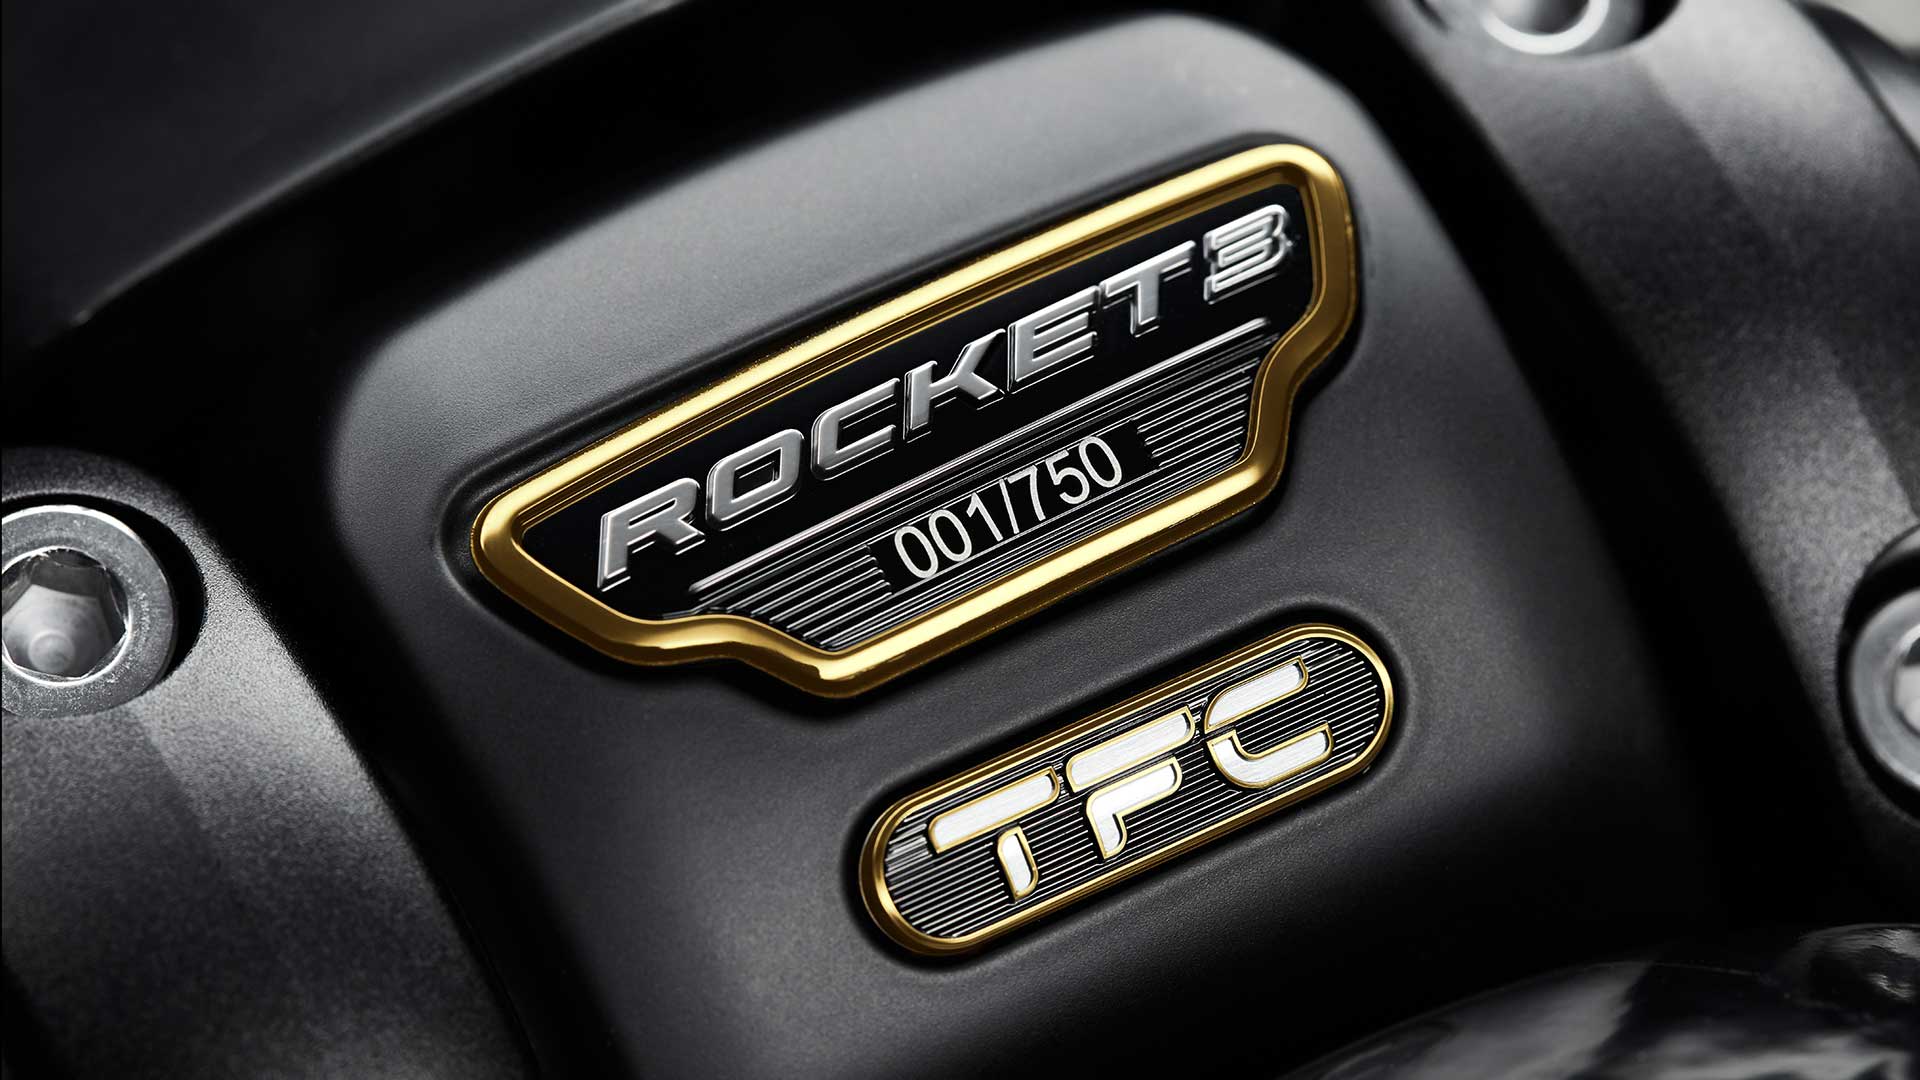 Triumph Rocket 3 TFC premium gold badging and detailing, including numbered, limited edition plaque